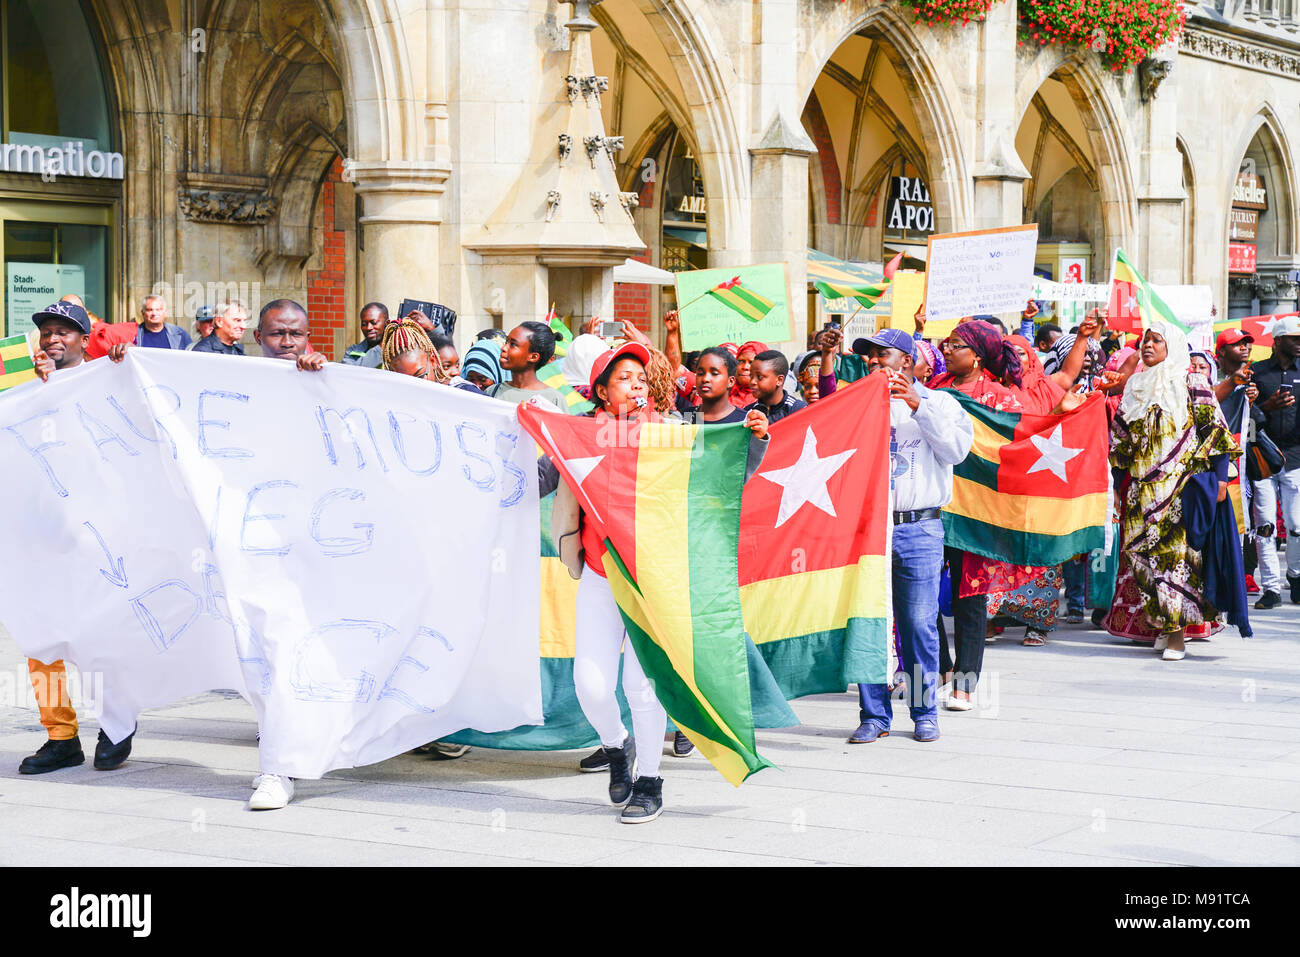 MUNICH, GERMANY - SEPTEMBER 8 2017; protestors carrying signs and Togo flags march through tourists in city central square below the gothic city hall. Stock Photo